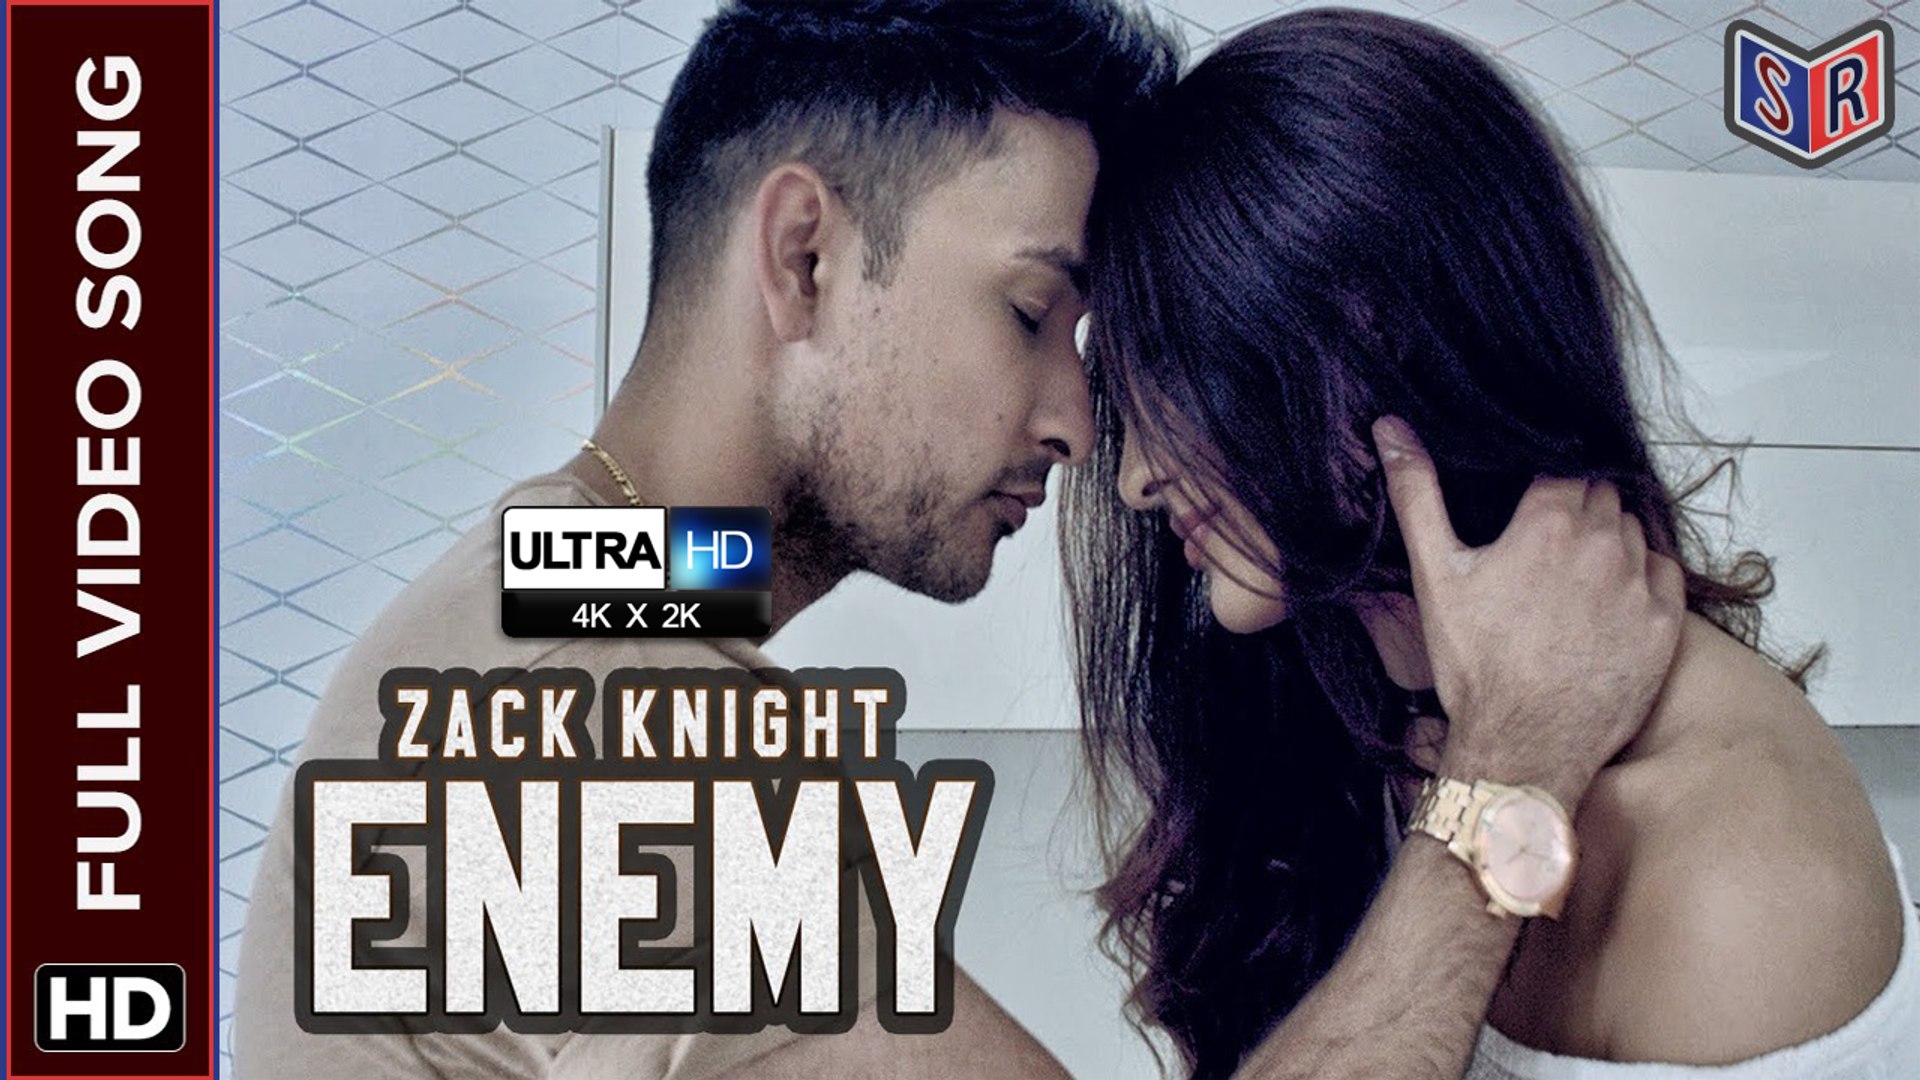 Enemy Full Video Song Song By Zack Knight New Song 2016 Full Hd Suleman Record Video Dailymotion